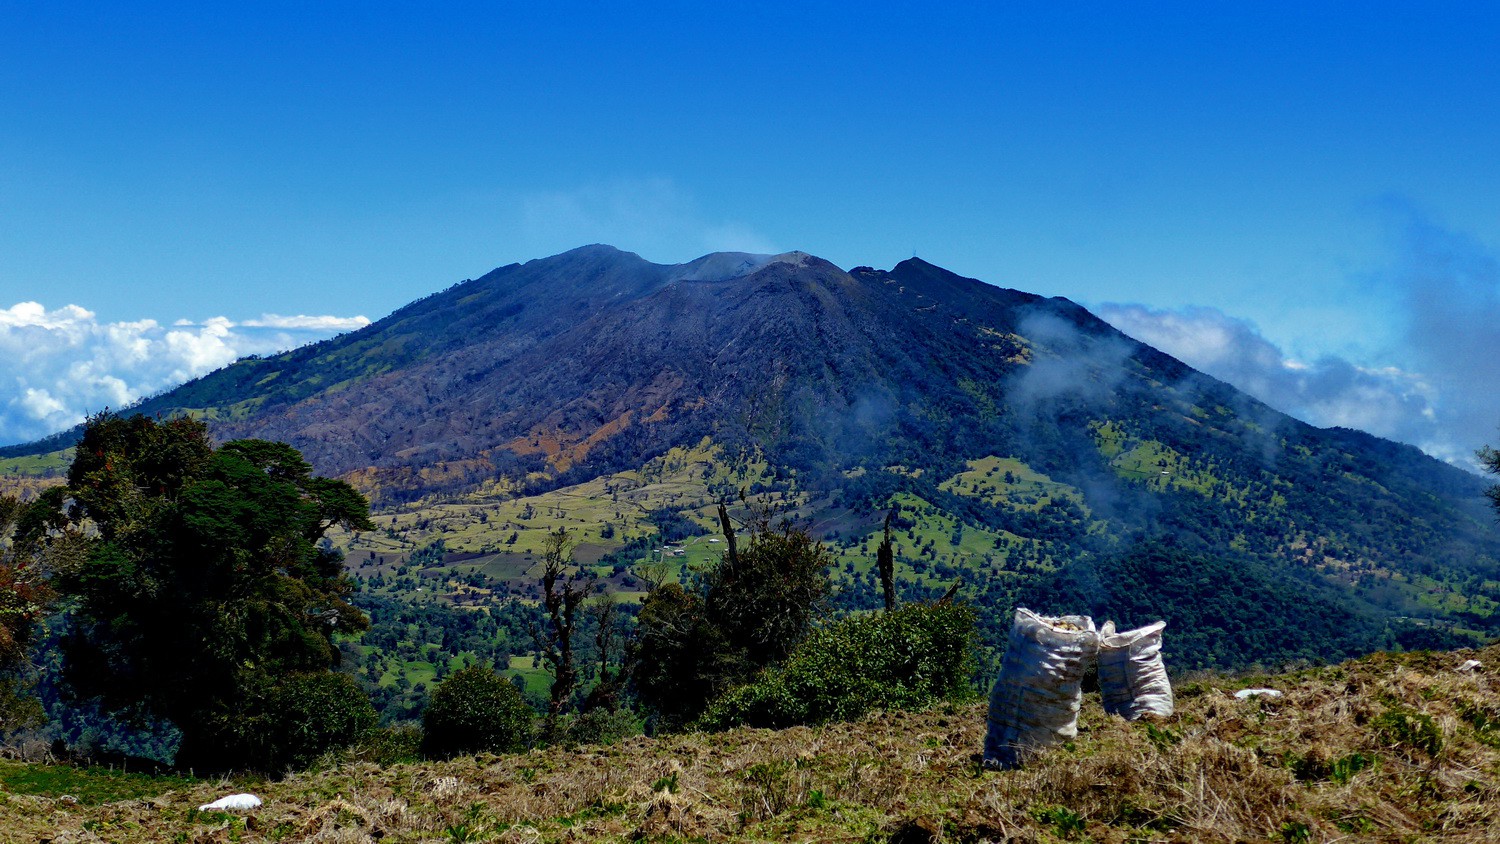 Volcan Turrialba opposite of Irazú - Few days later the airport of San Jose was closed due to an eruption of an ash cloud!